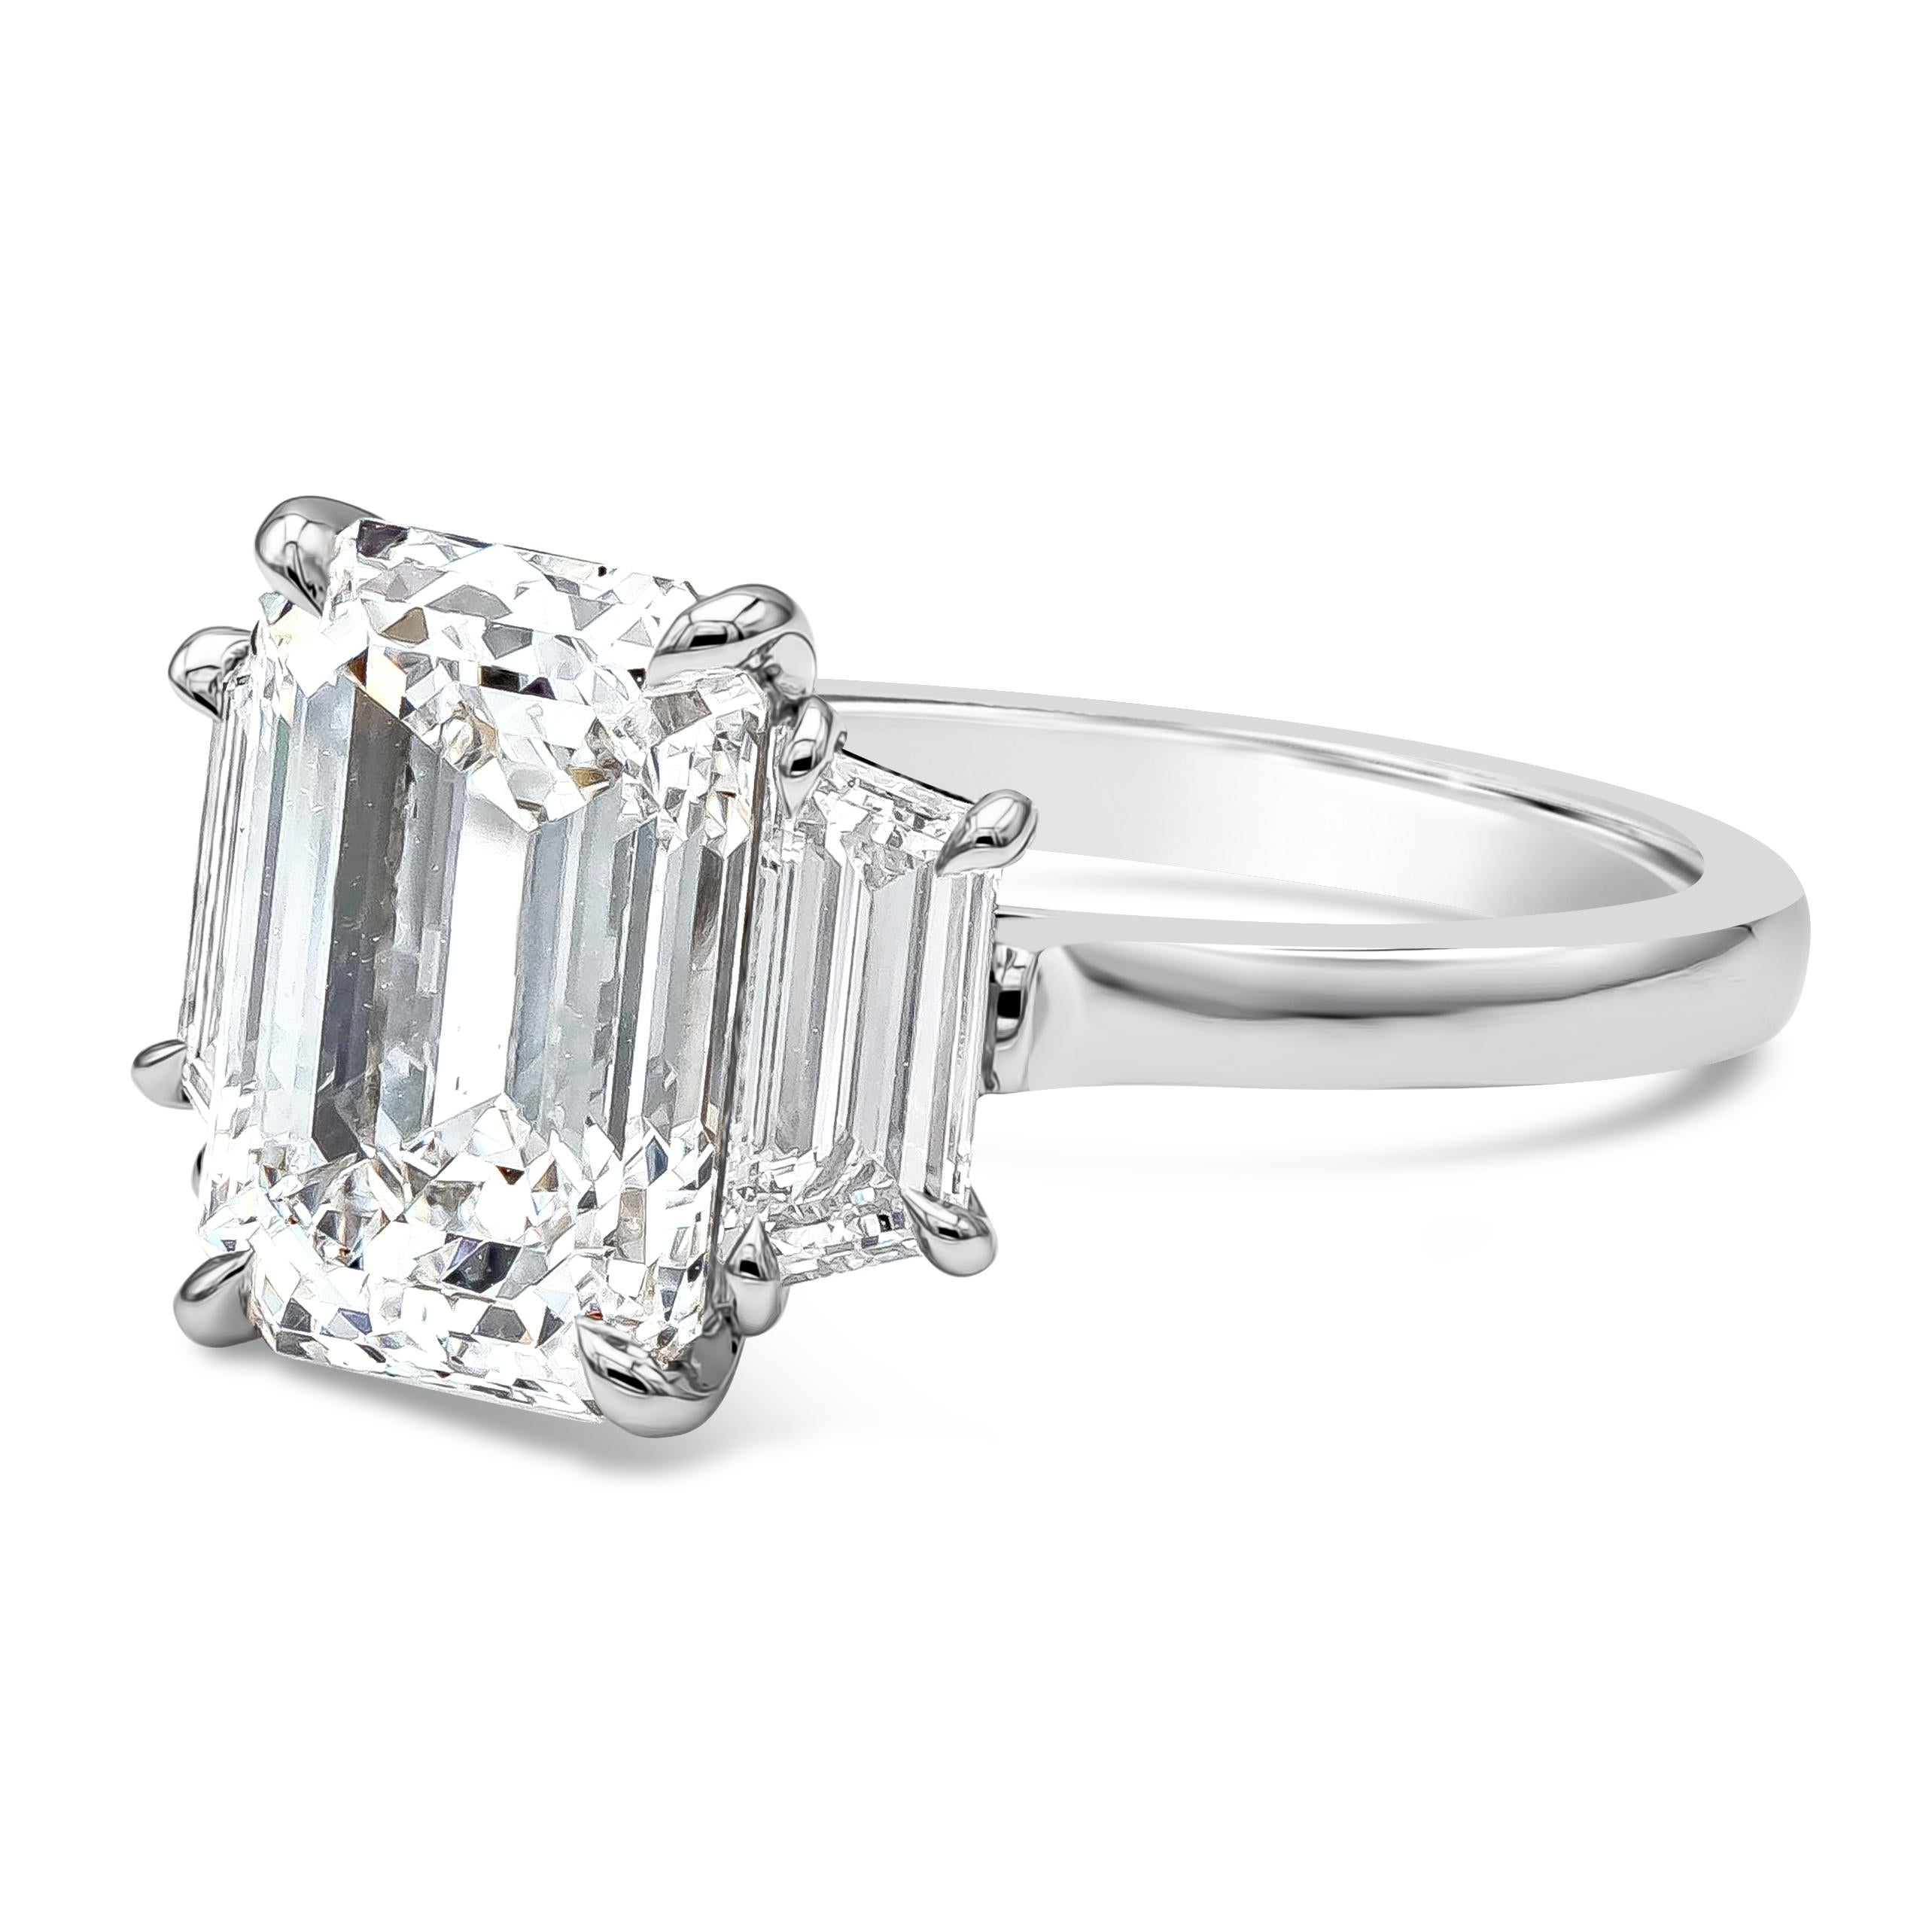 A classic and timeless three-stone engagement ring style showcasing a 4.07 carats emerald cut diamond certified by GIA as D color, SI1 in clarity, flanked by step-cut trapezoid diamonds on either side. Accent diamonds weigh 0.84 carats total and